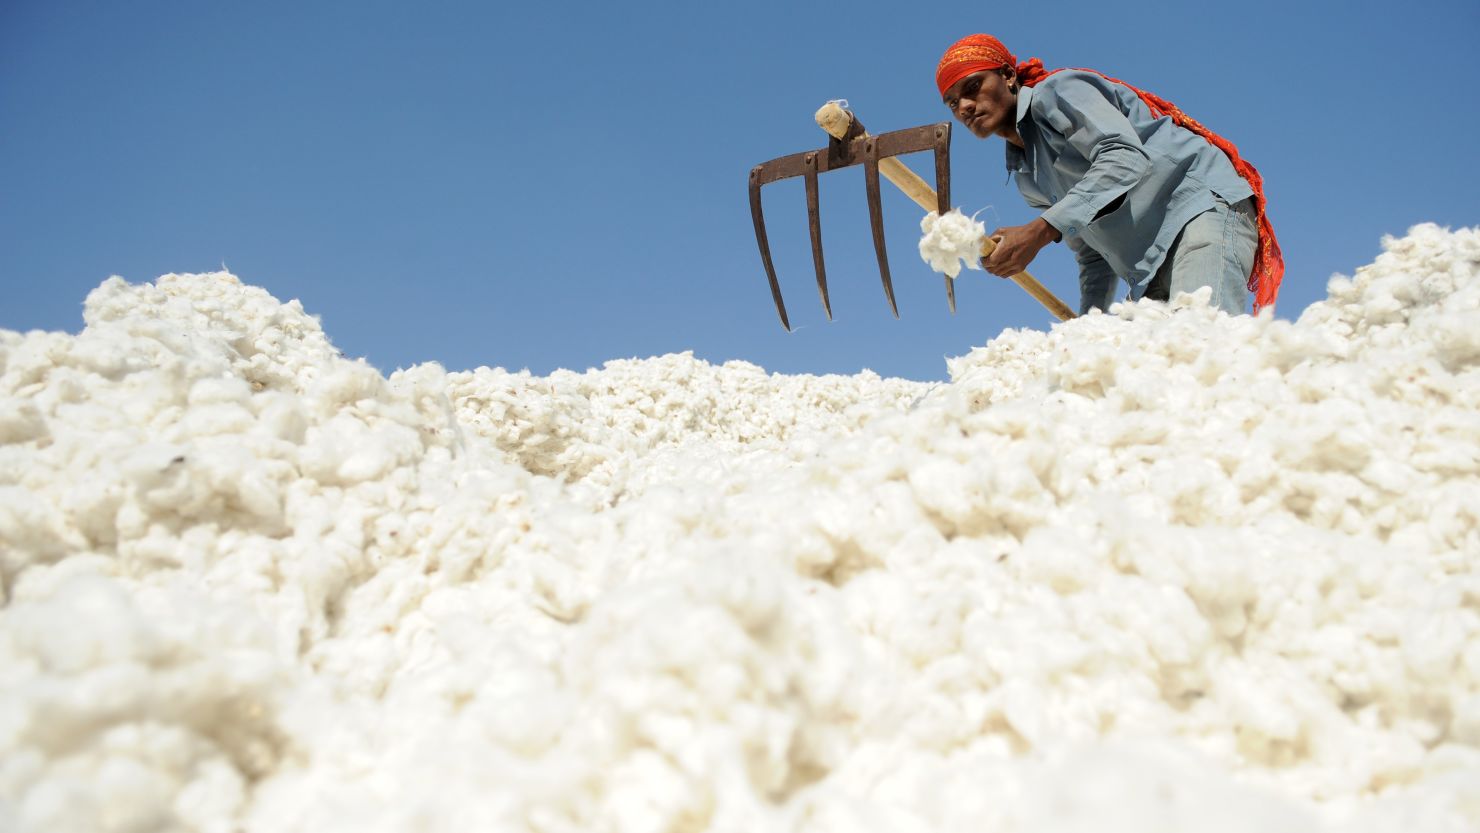 An Indian worker sorting cotton at Patel Cotton Industries, Ginners and Exporters, in Dhrangadhra, India on December 16, 2011